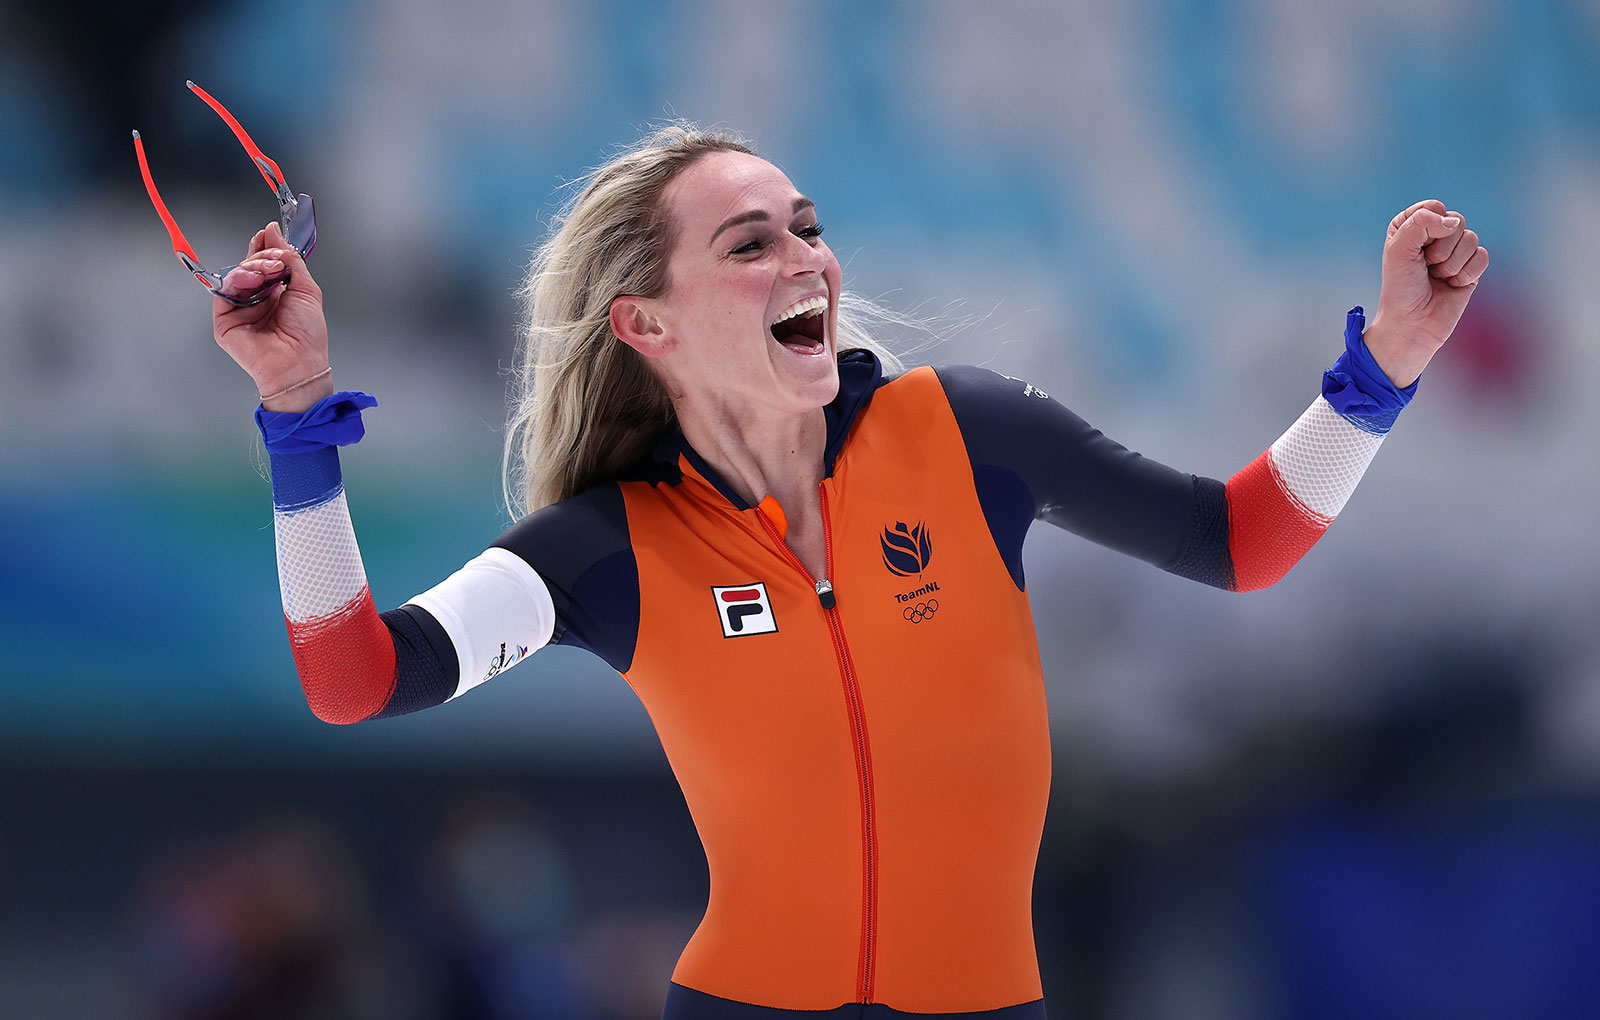 Dutch speed skater Irene Schouten celebrates after winning the 5,000m final on February 10. Schouten set a new Olympic record on her way to the gold medal.